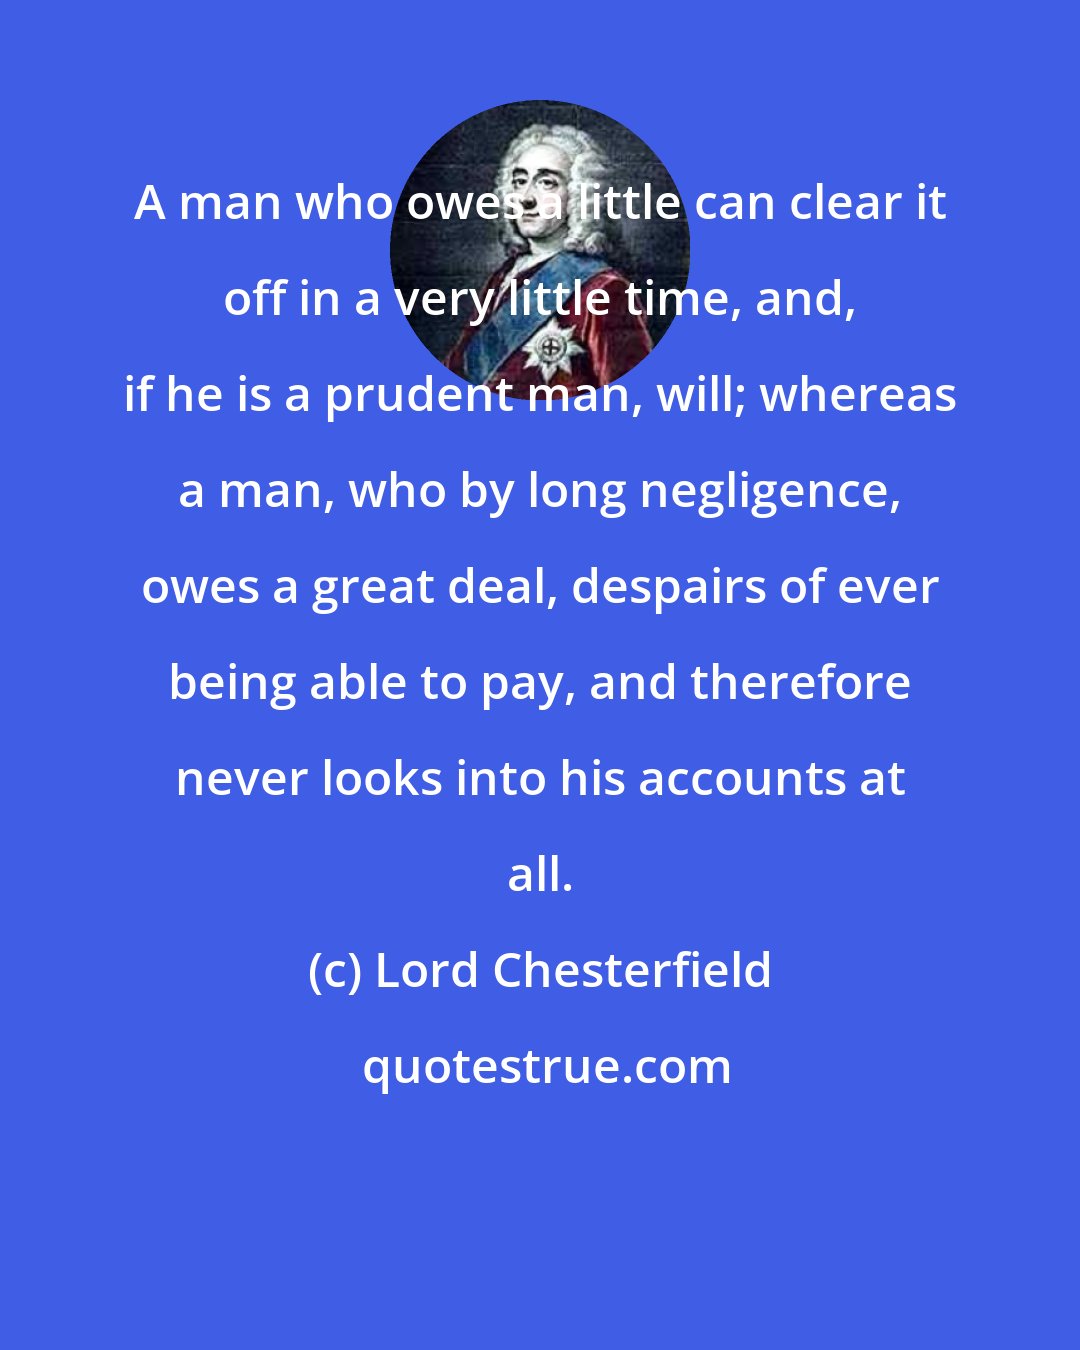 Lord Chesterfield: A man who owes a little can clear it off in a very little time, and, if he is a prudent man, will; whereas a man, who by long negligence, owes a great deal, despairs of ever being able to pay, and therefore never looks into his accounts at all.